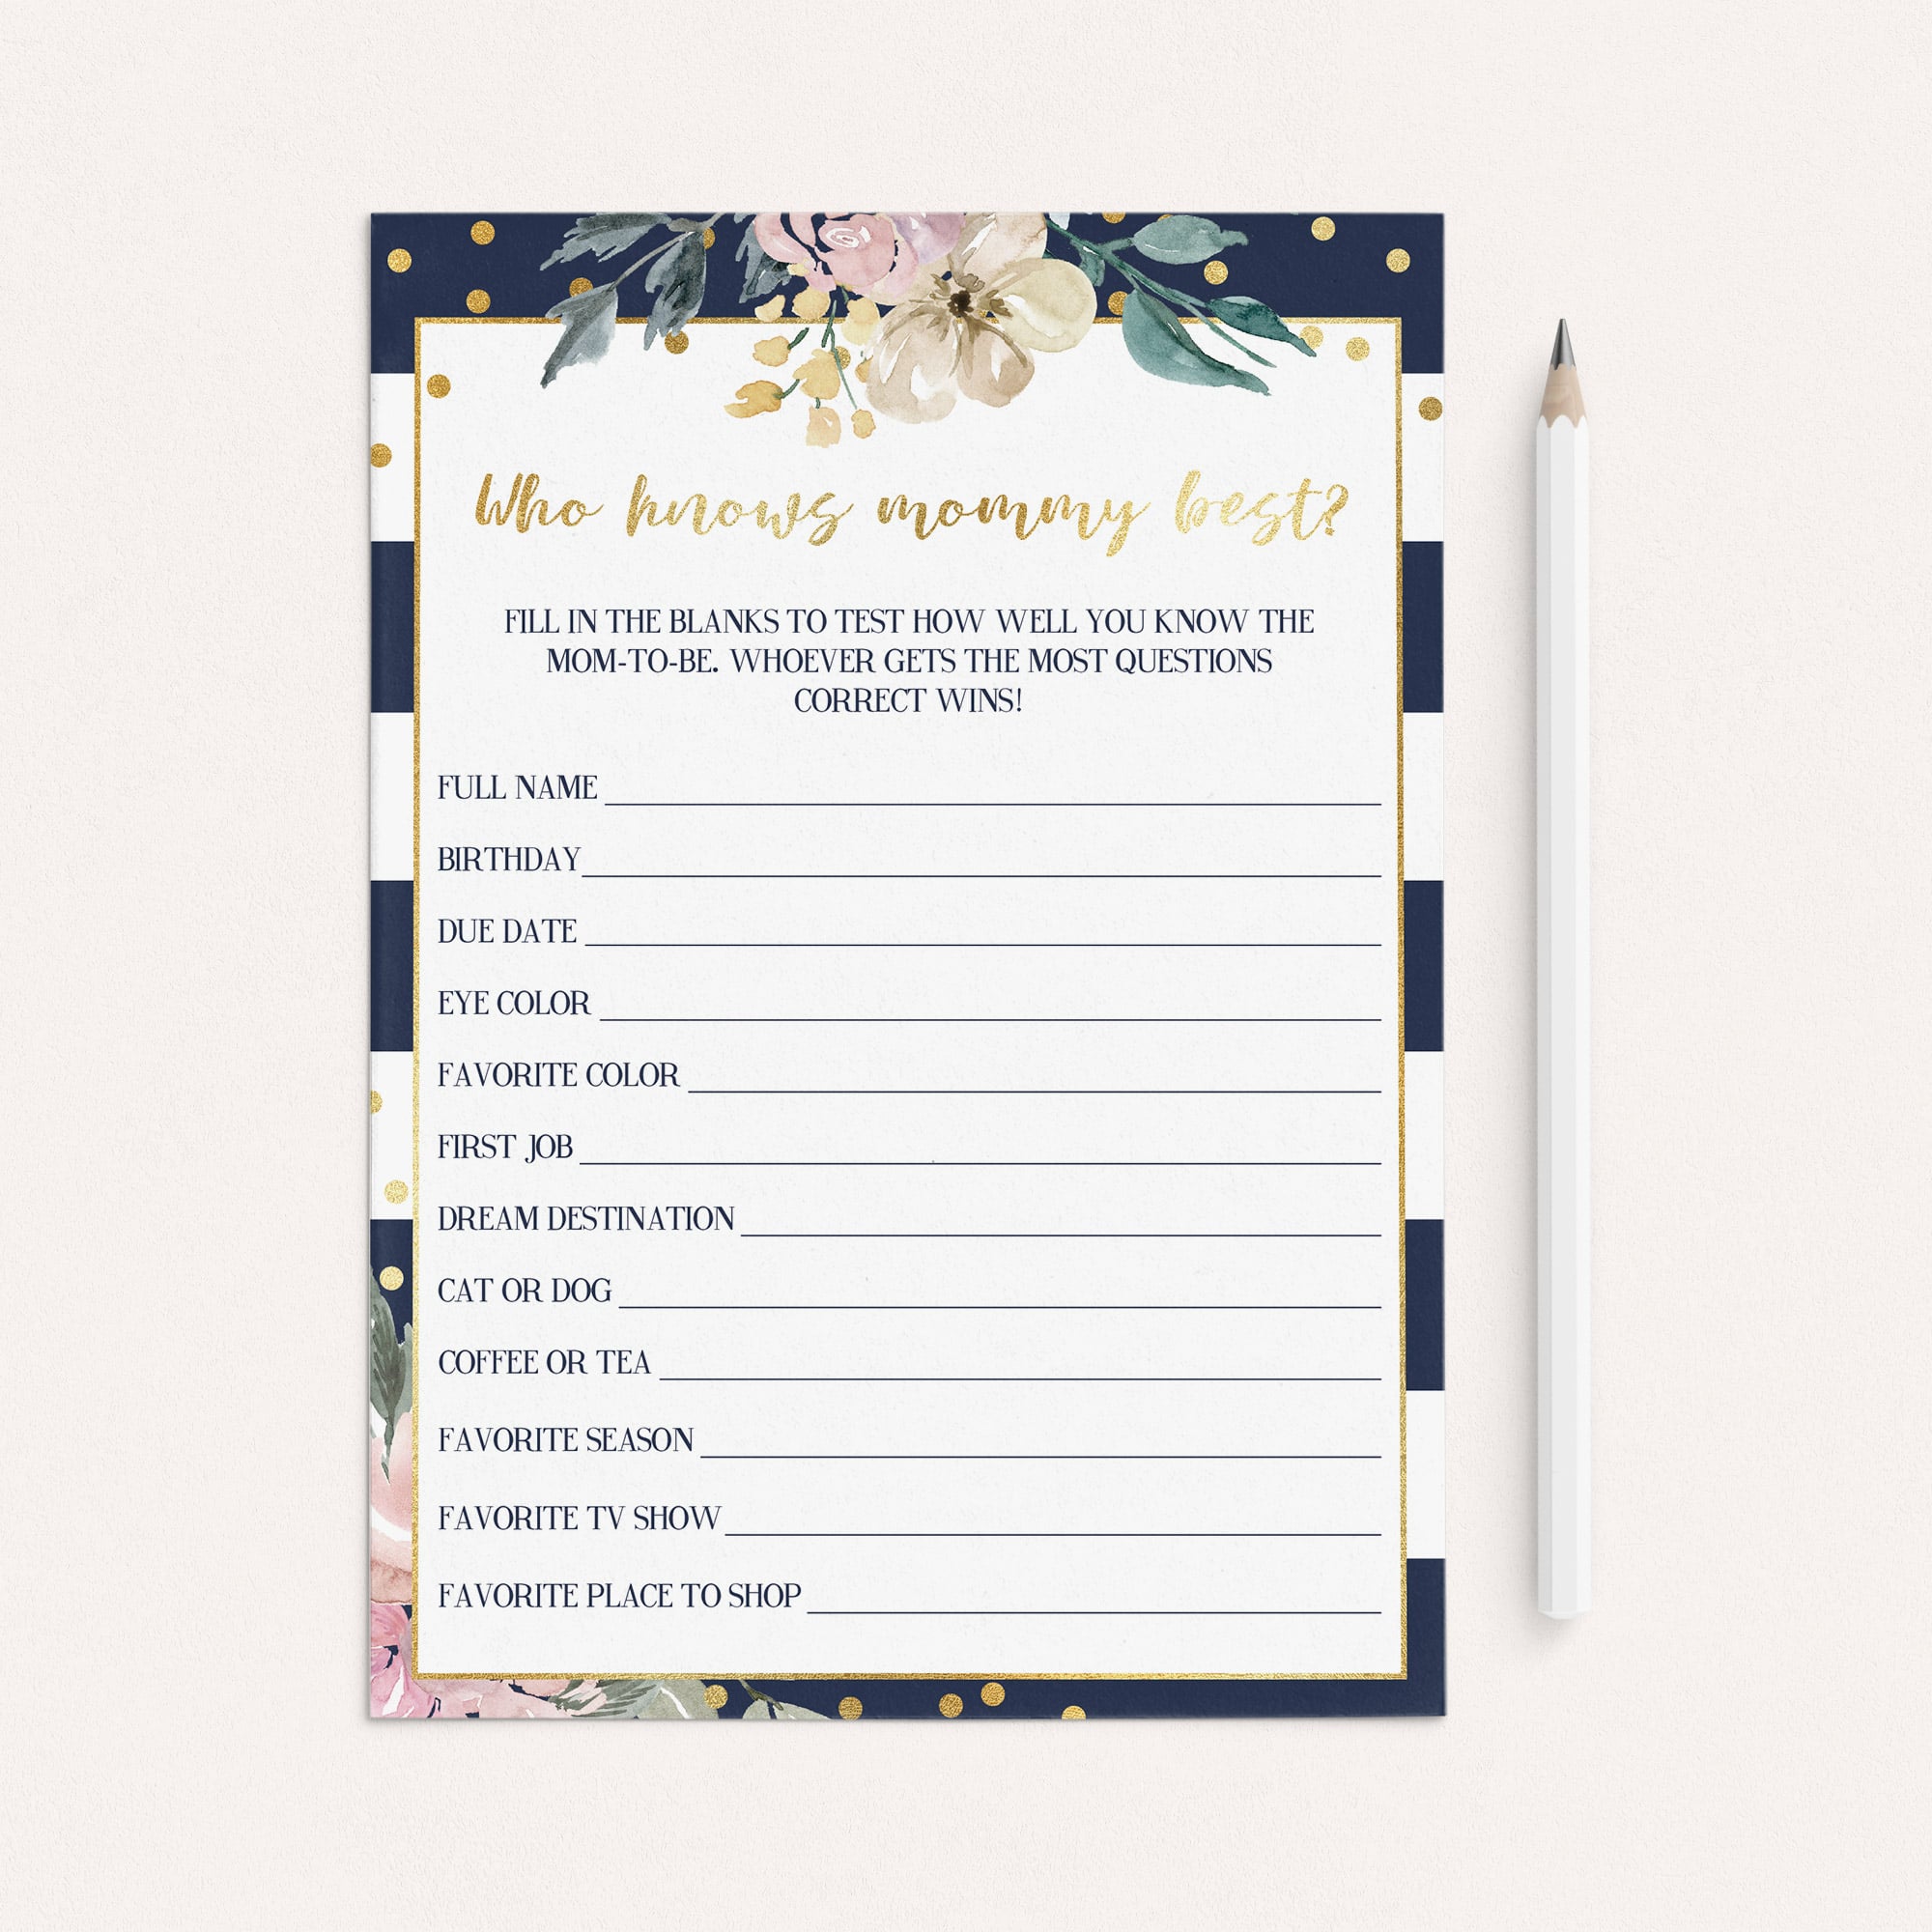 Gold confetti and navy strips baby shower game download by LittleSizzle